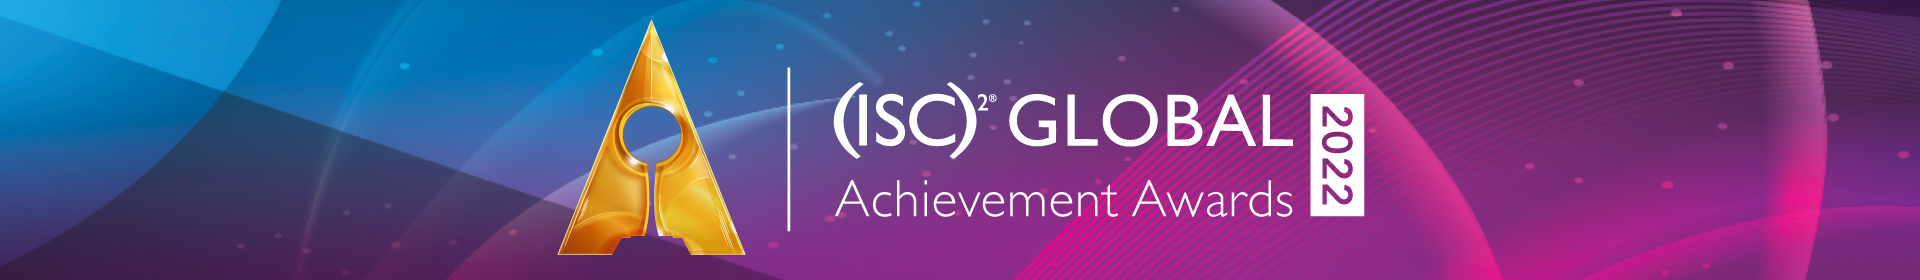 2022 (ISC)² Global Achievement Awards Event Banner